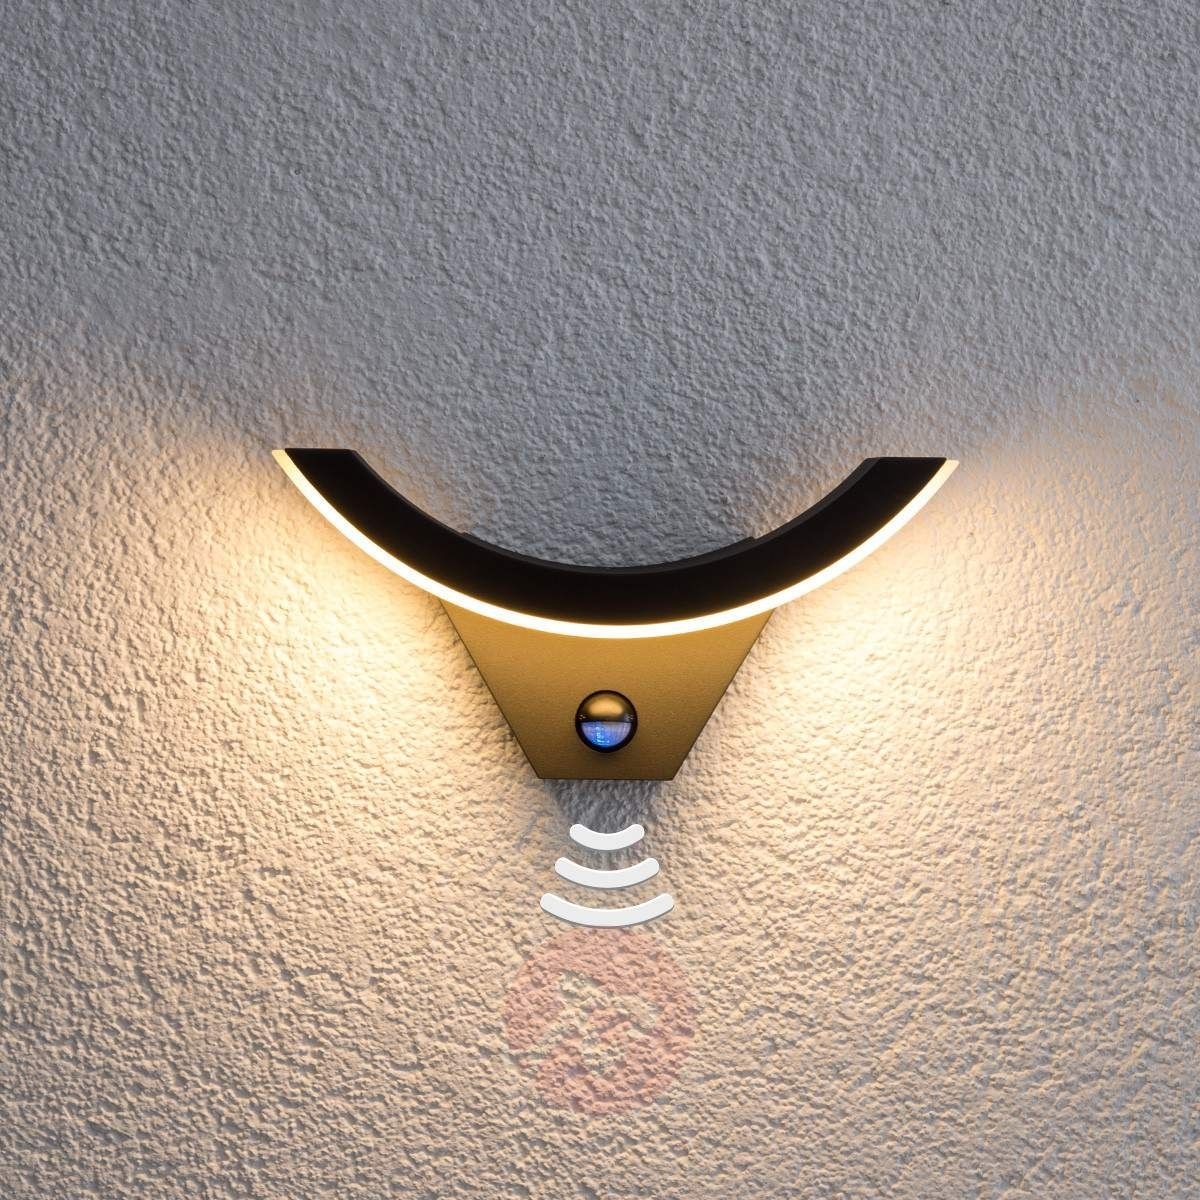 Led Outdoor Wall Light Half With Motion Detector | Lights.co.uk With Pir Sensor Outdoor Wall Lighting (Photo 14 of 15)